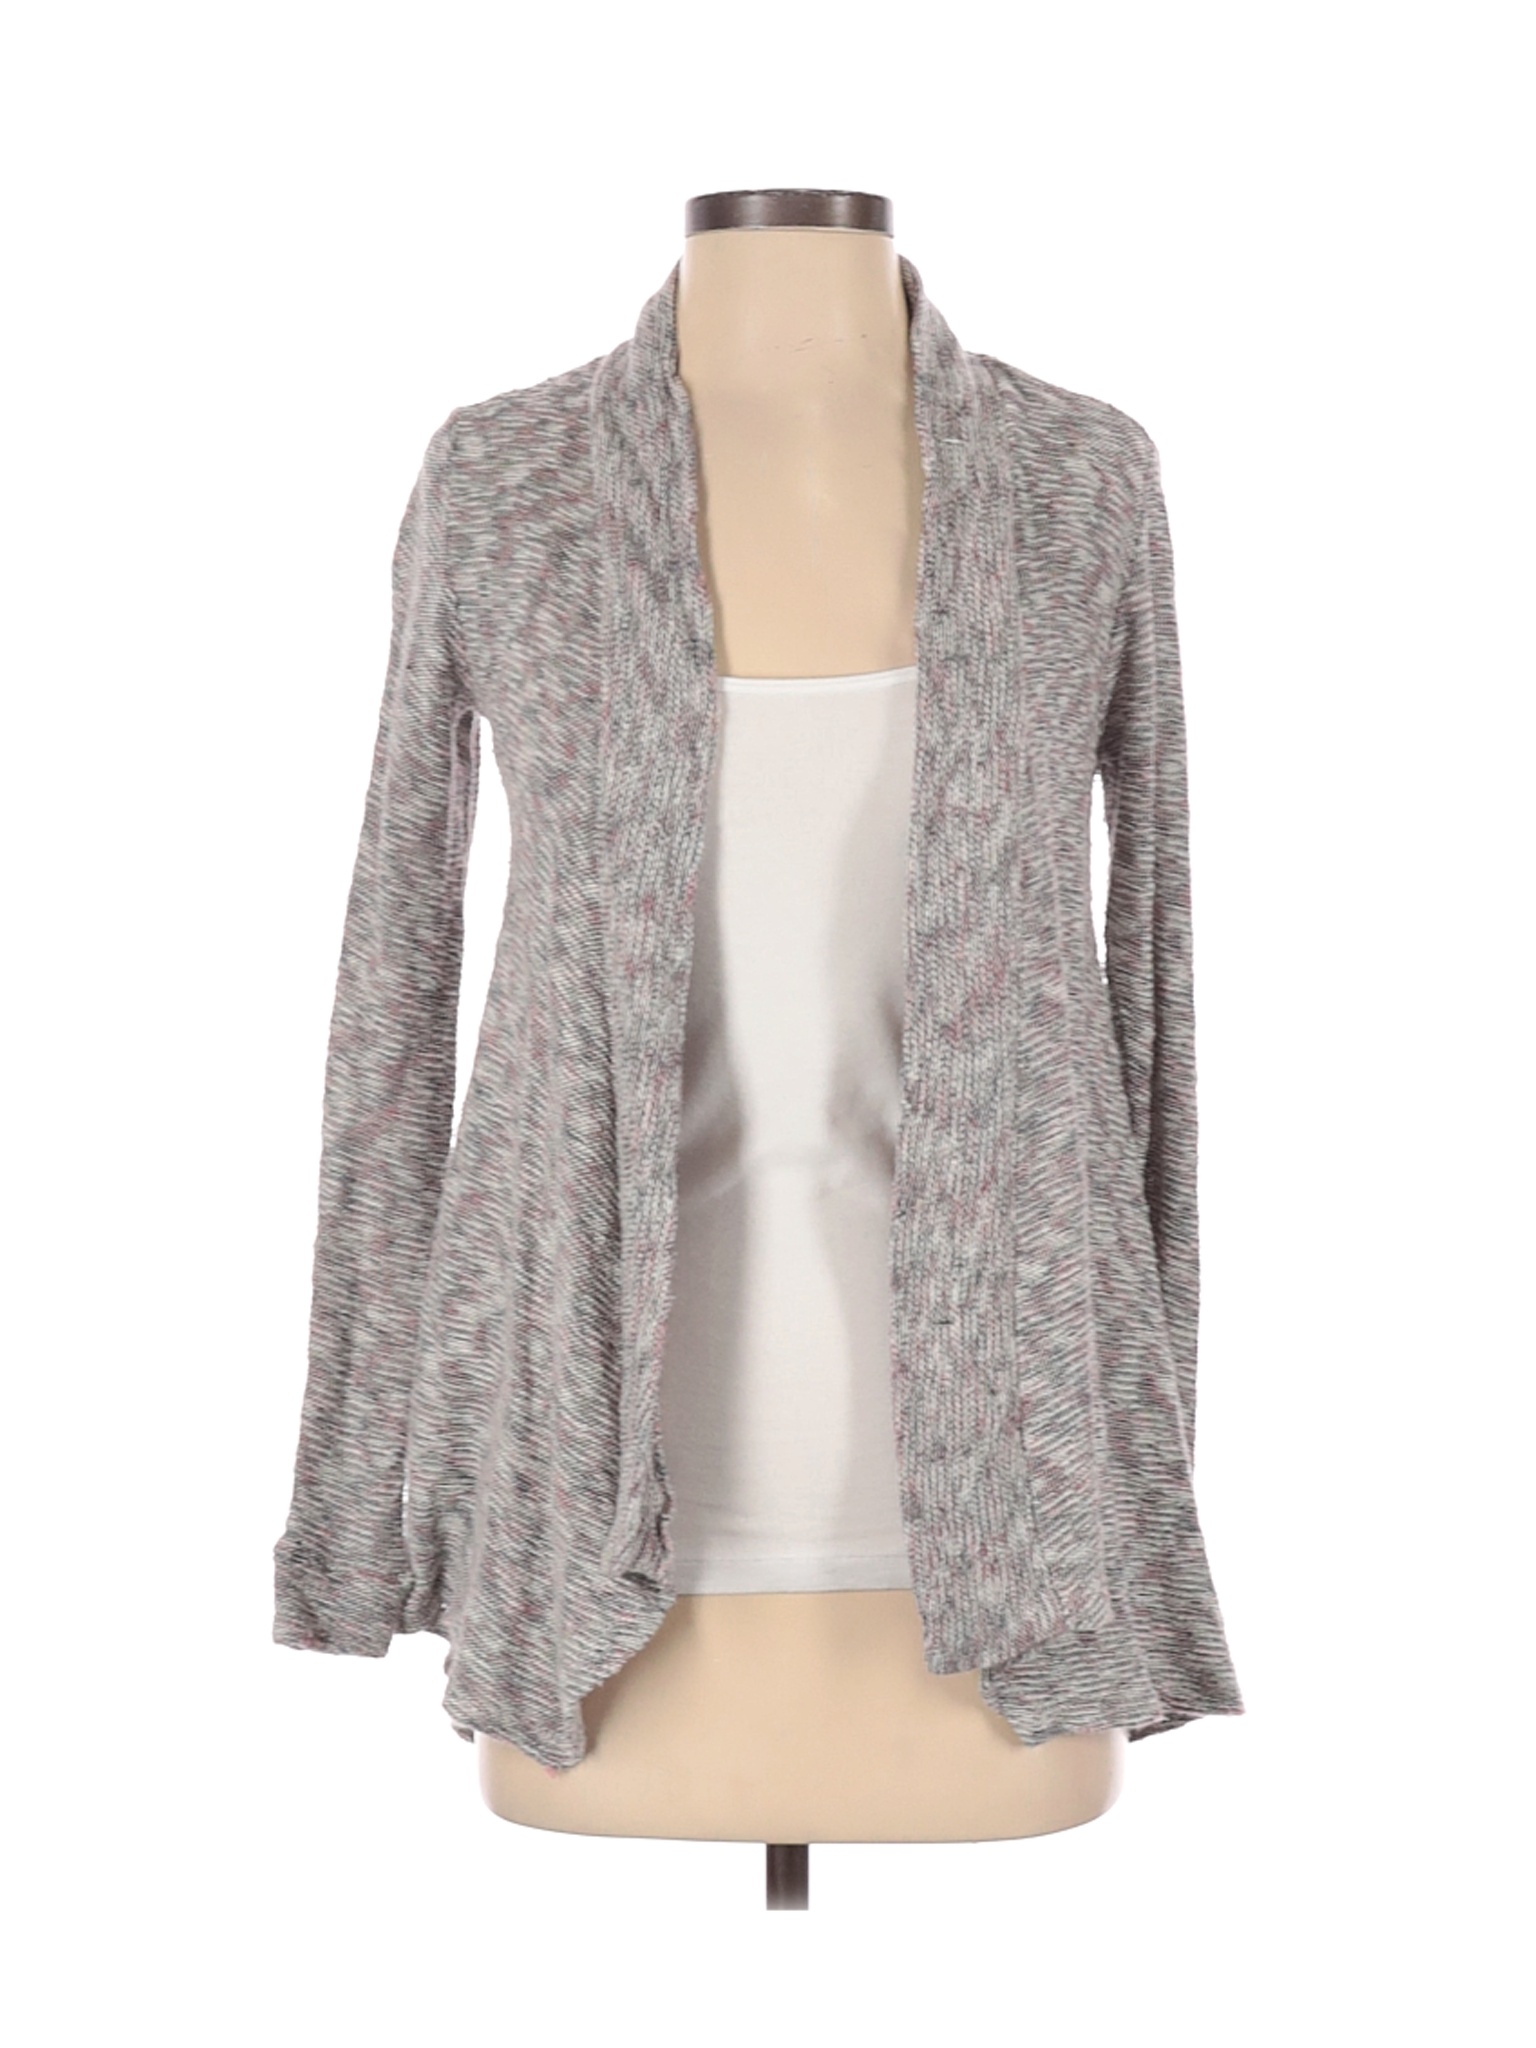 American Eagle Outfitters Women Gray Cardigan XS | eBay